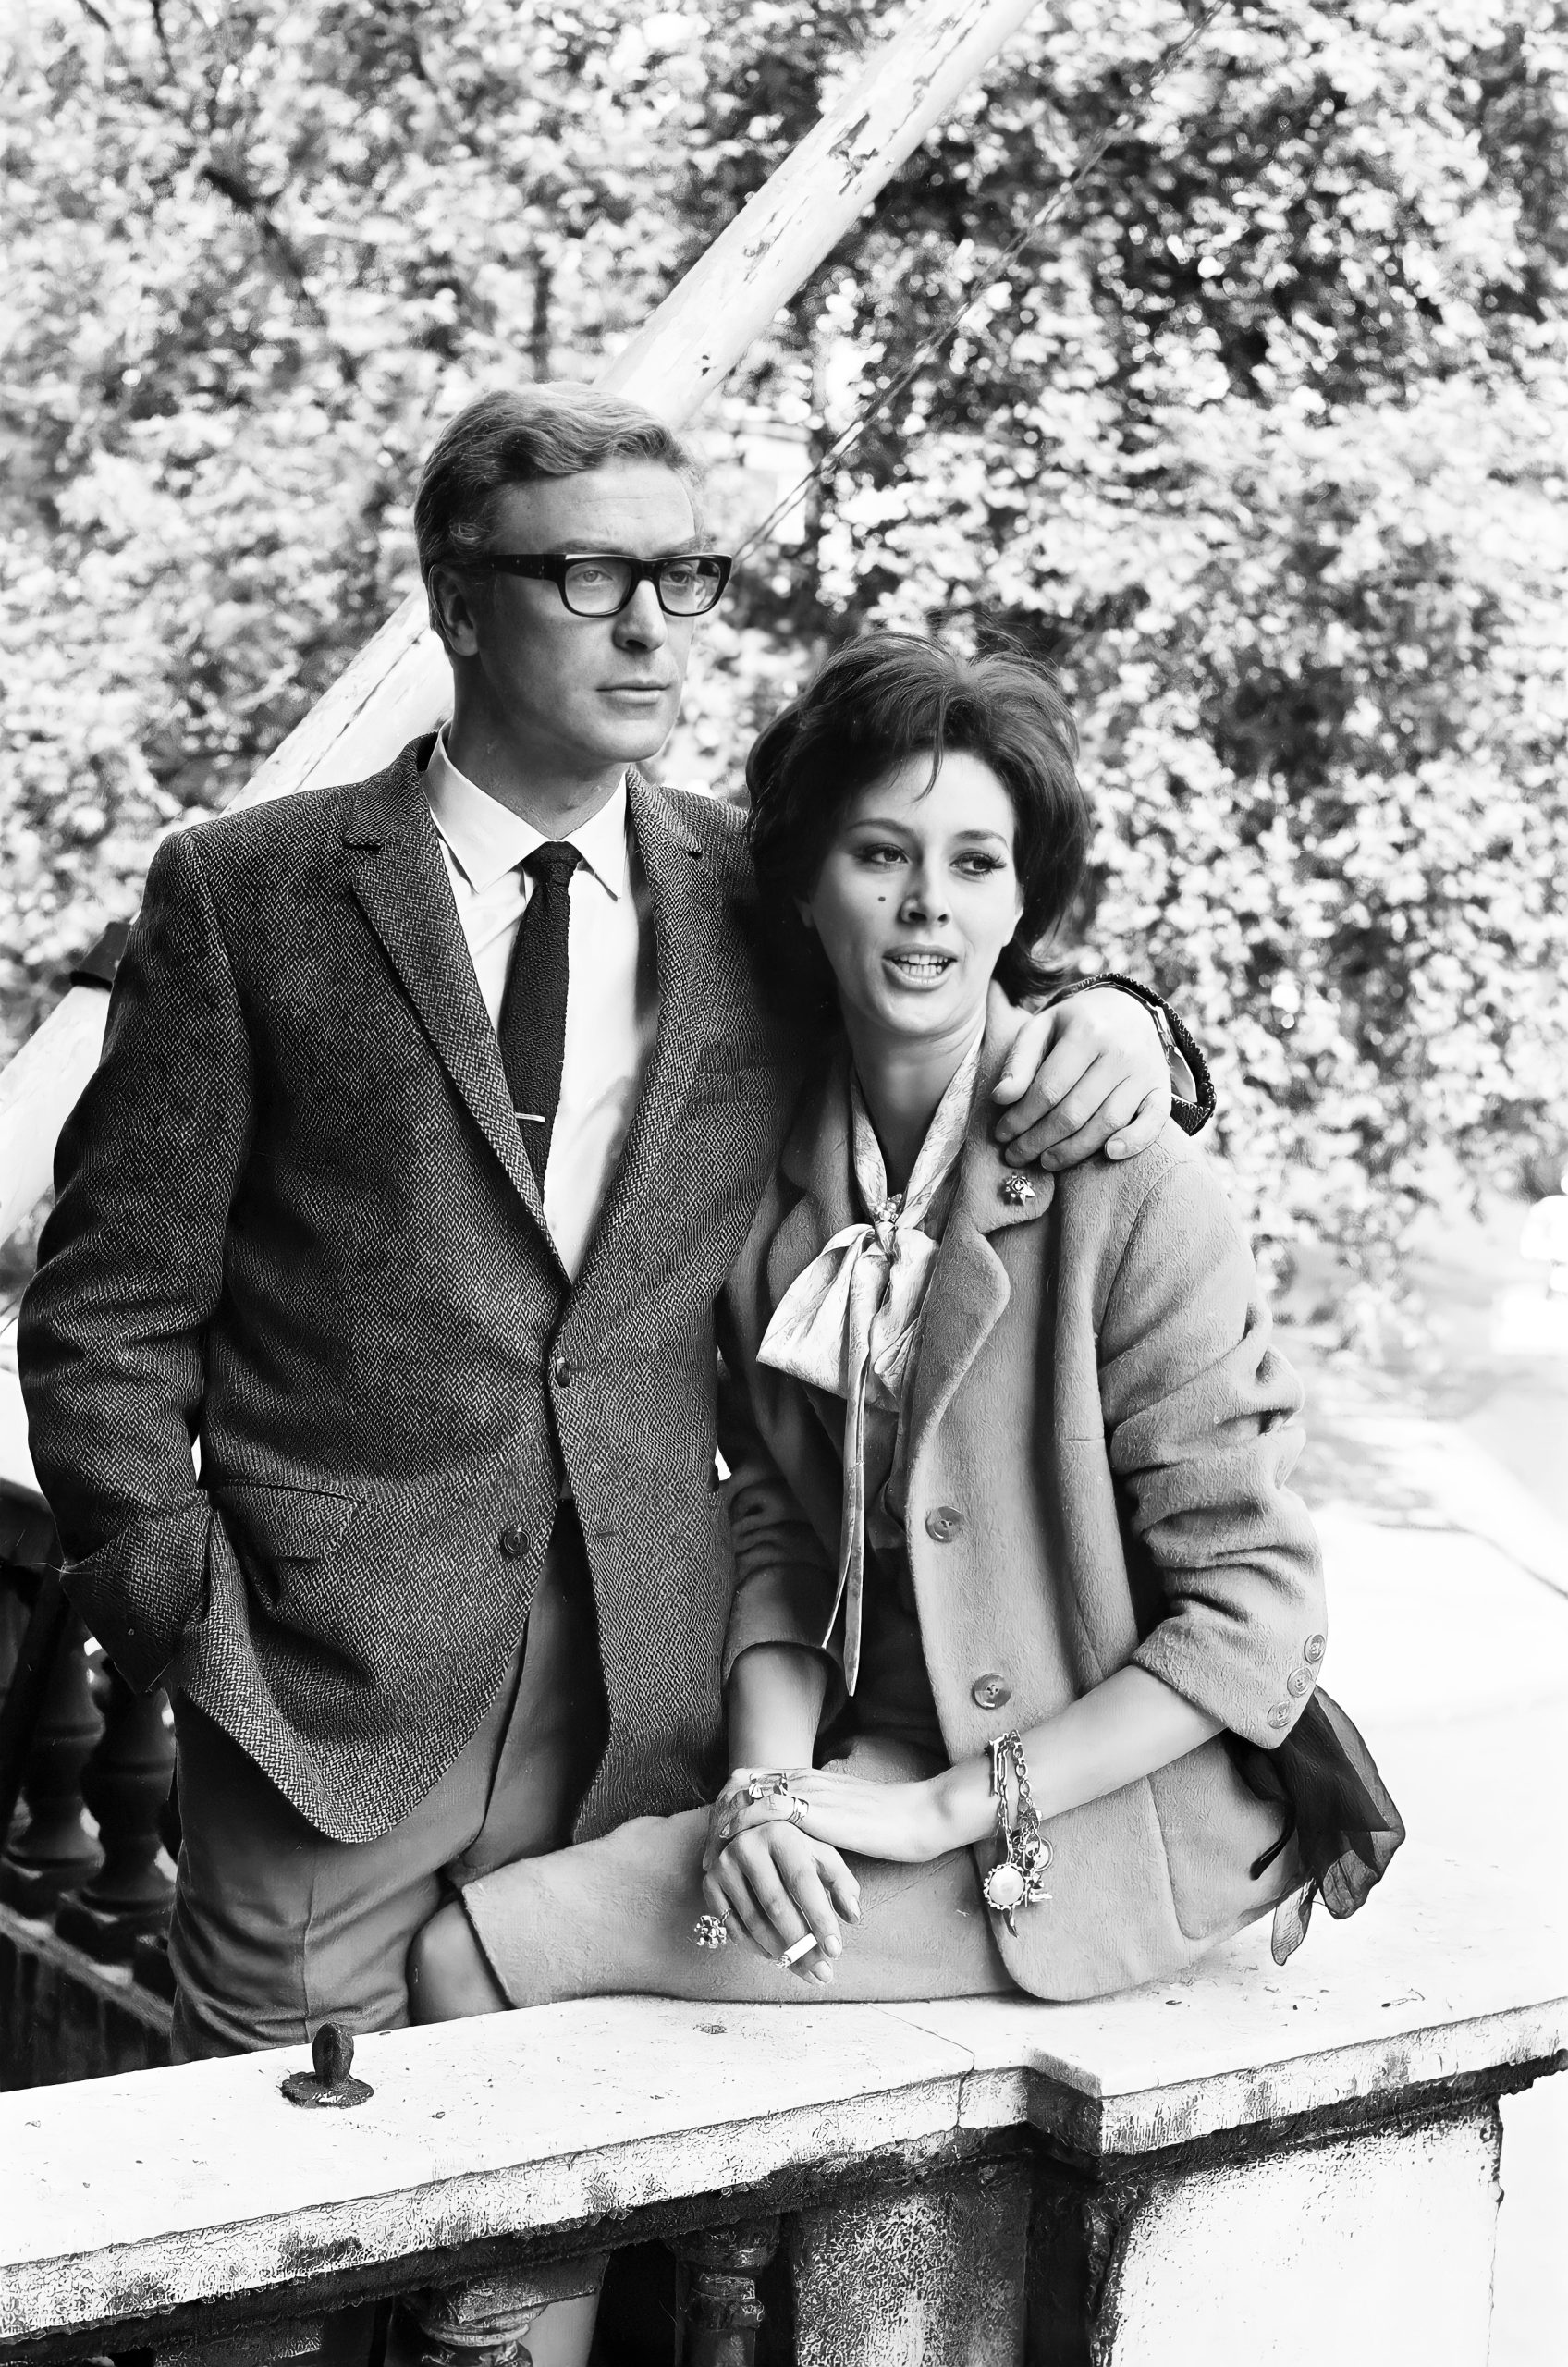 https://achievement.org/wp-content/uploads/2019/04/2-1964-ipcress-file-GettyImages-874948252-1-scaled.jpg